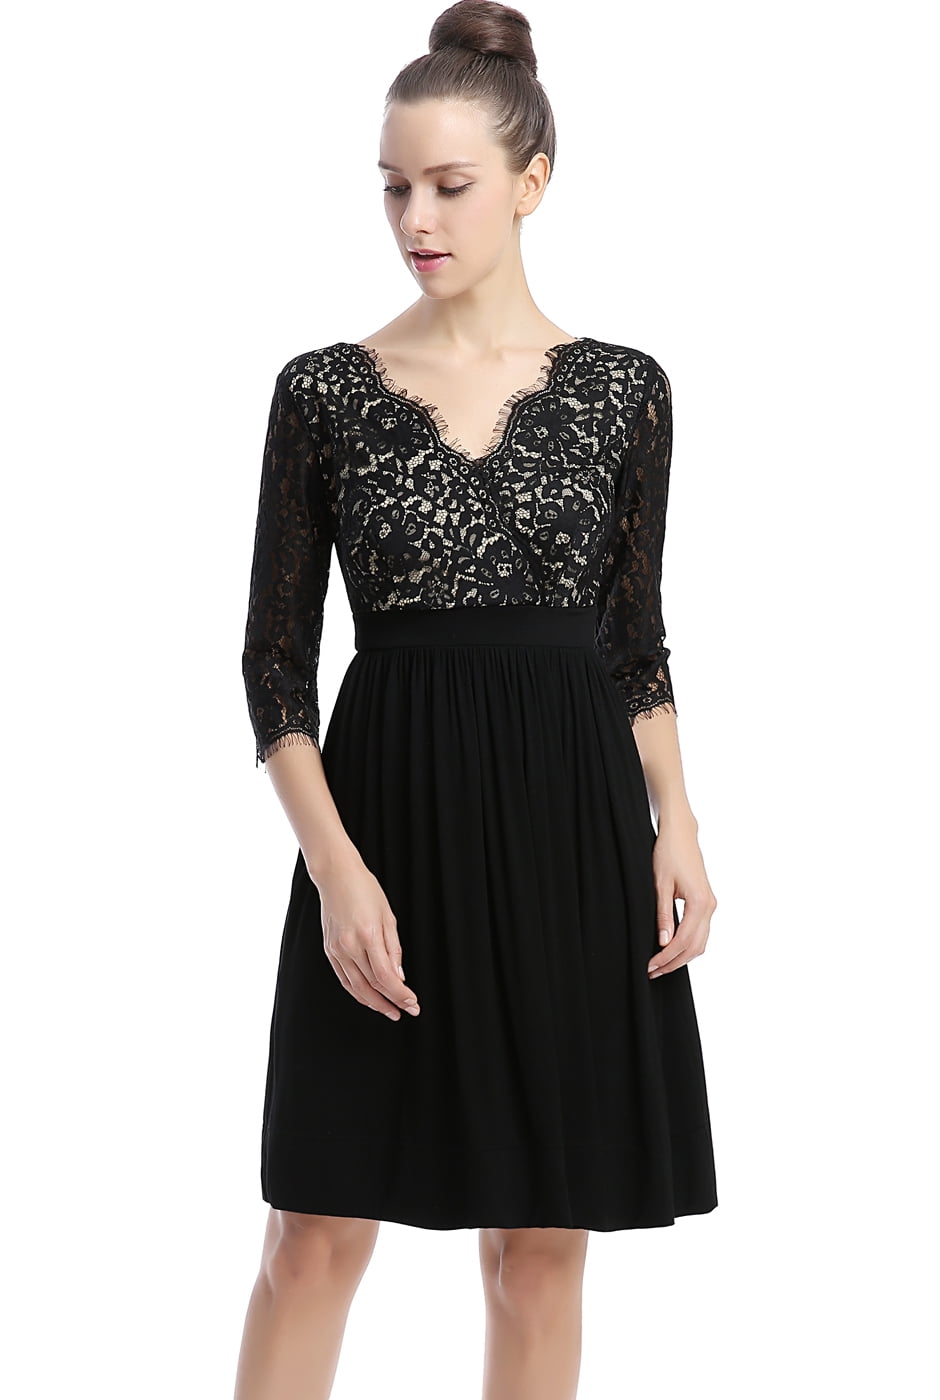 phistic Womens Fit & Flare Lace Dress